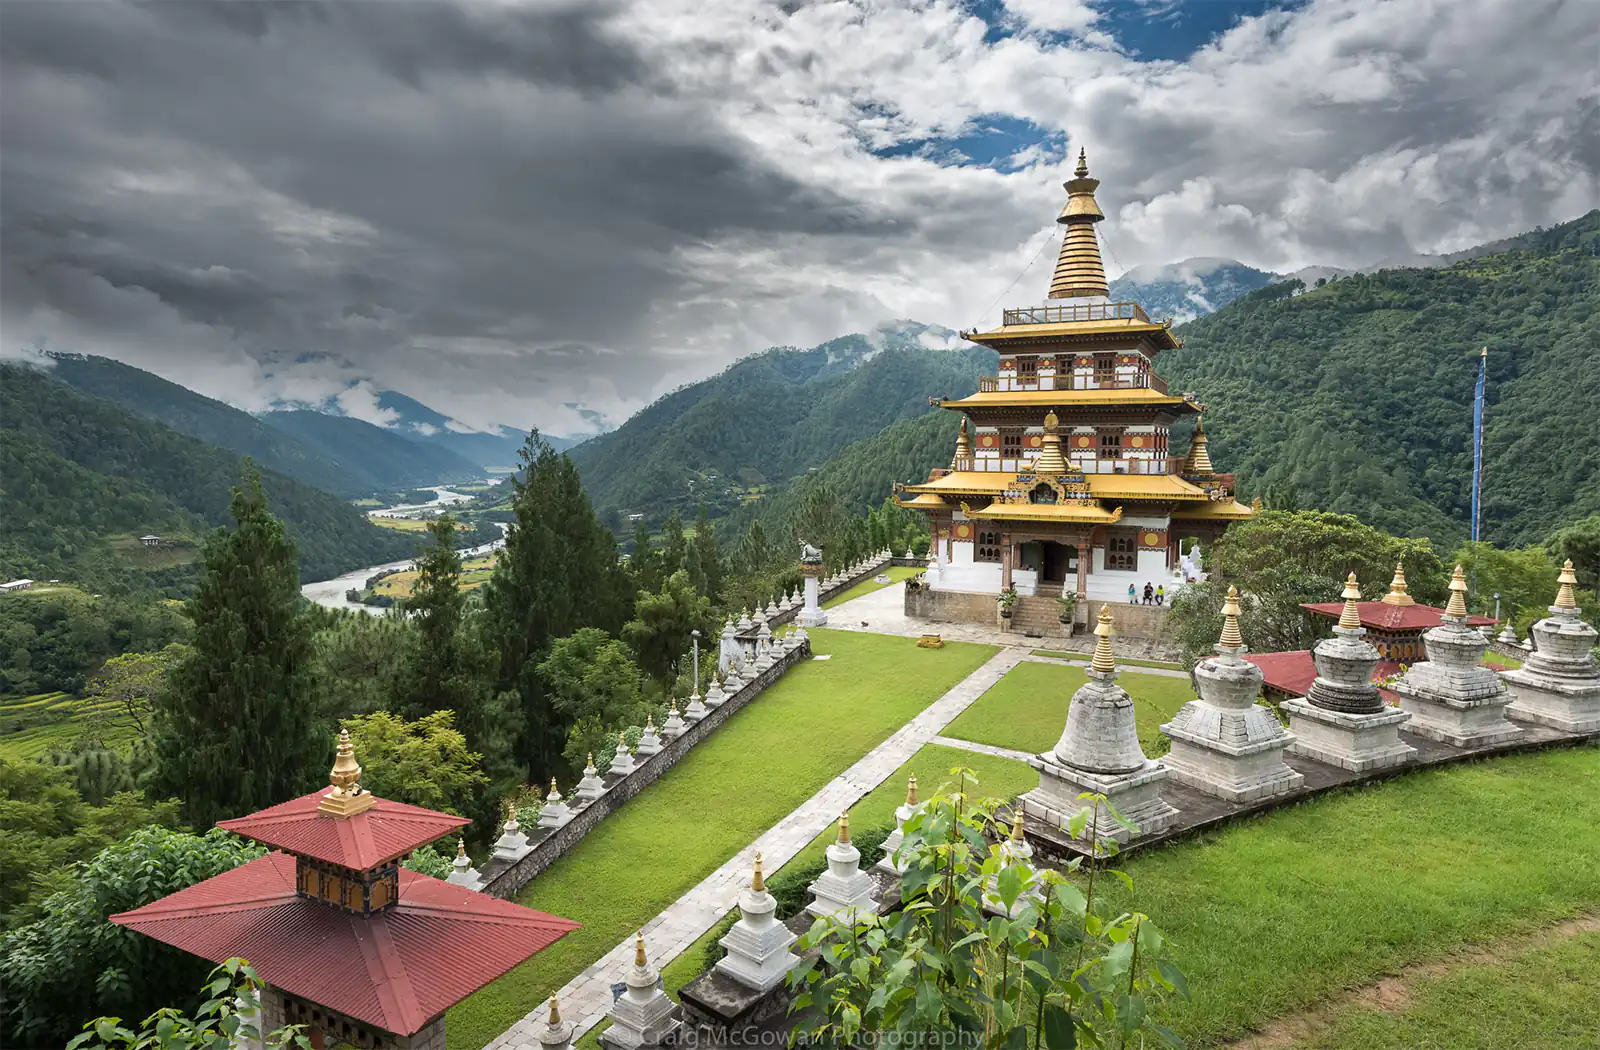 Khamsum Yulley Namgyal Chorten was commissioned by the Queen's mother